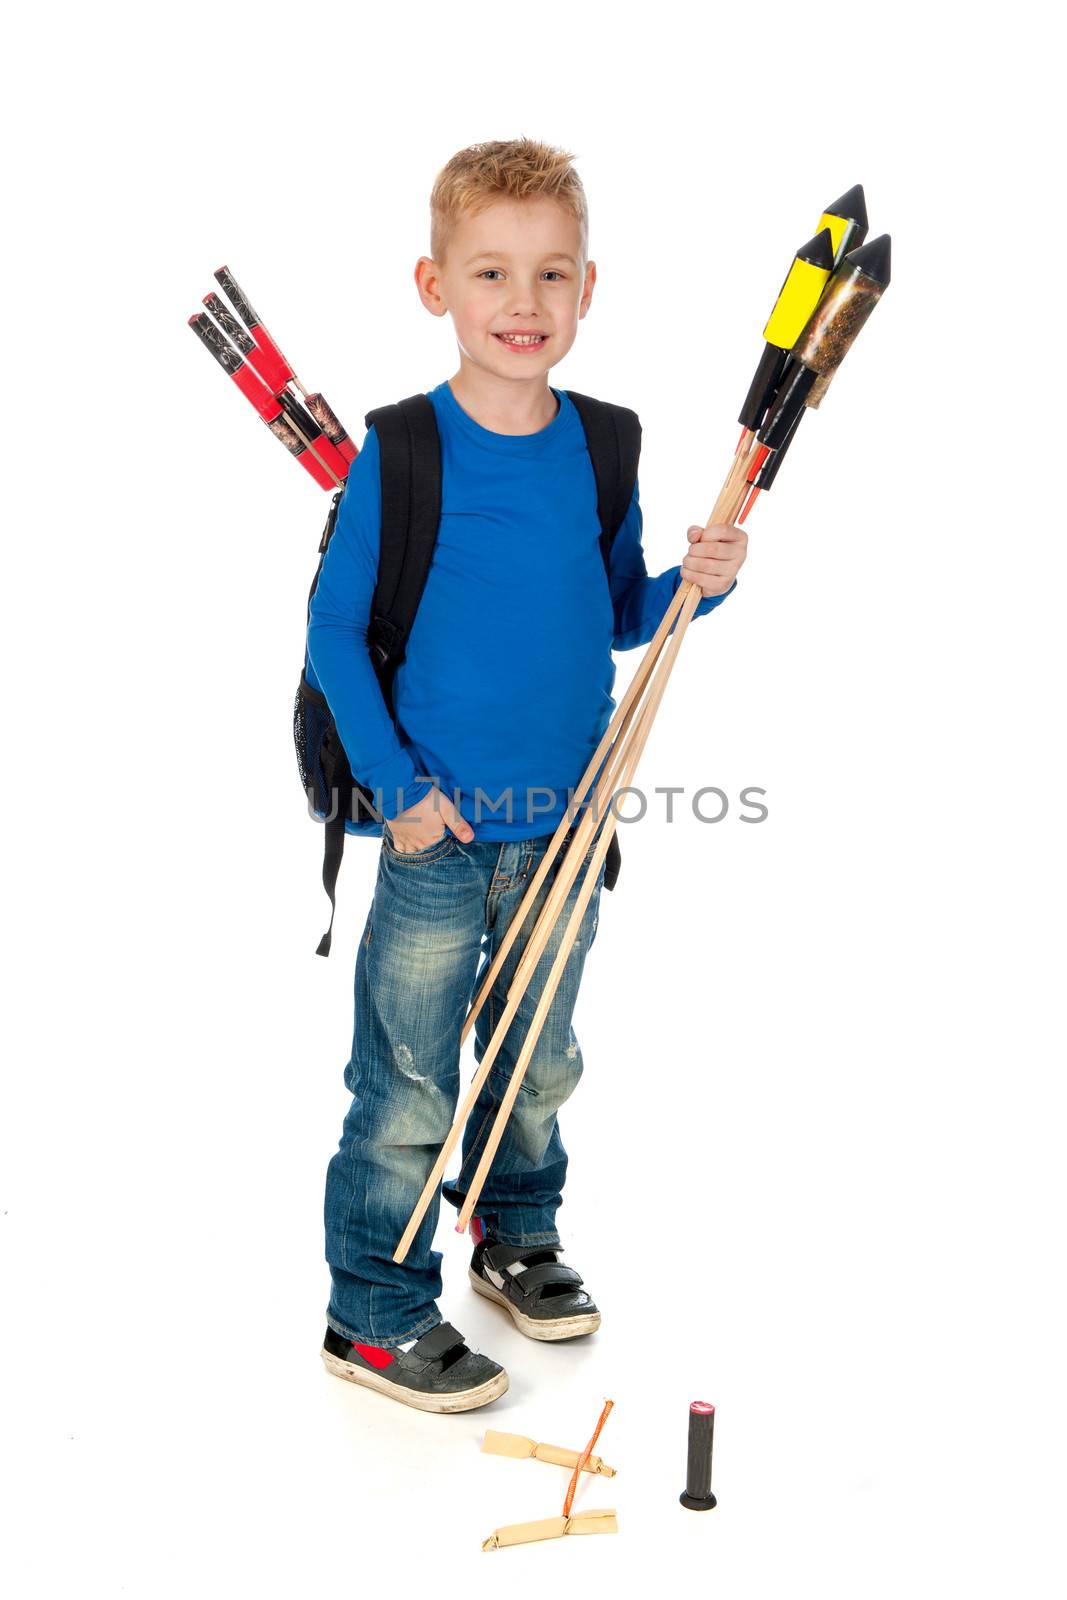 A boy who's to little with firework witch is too big on a white background